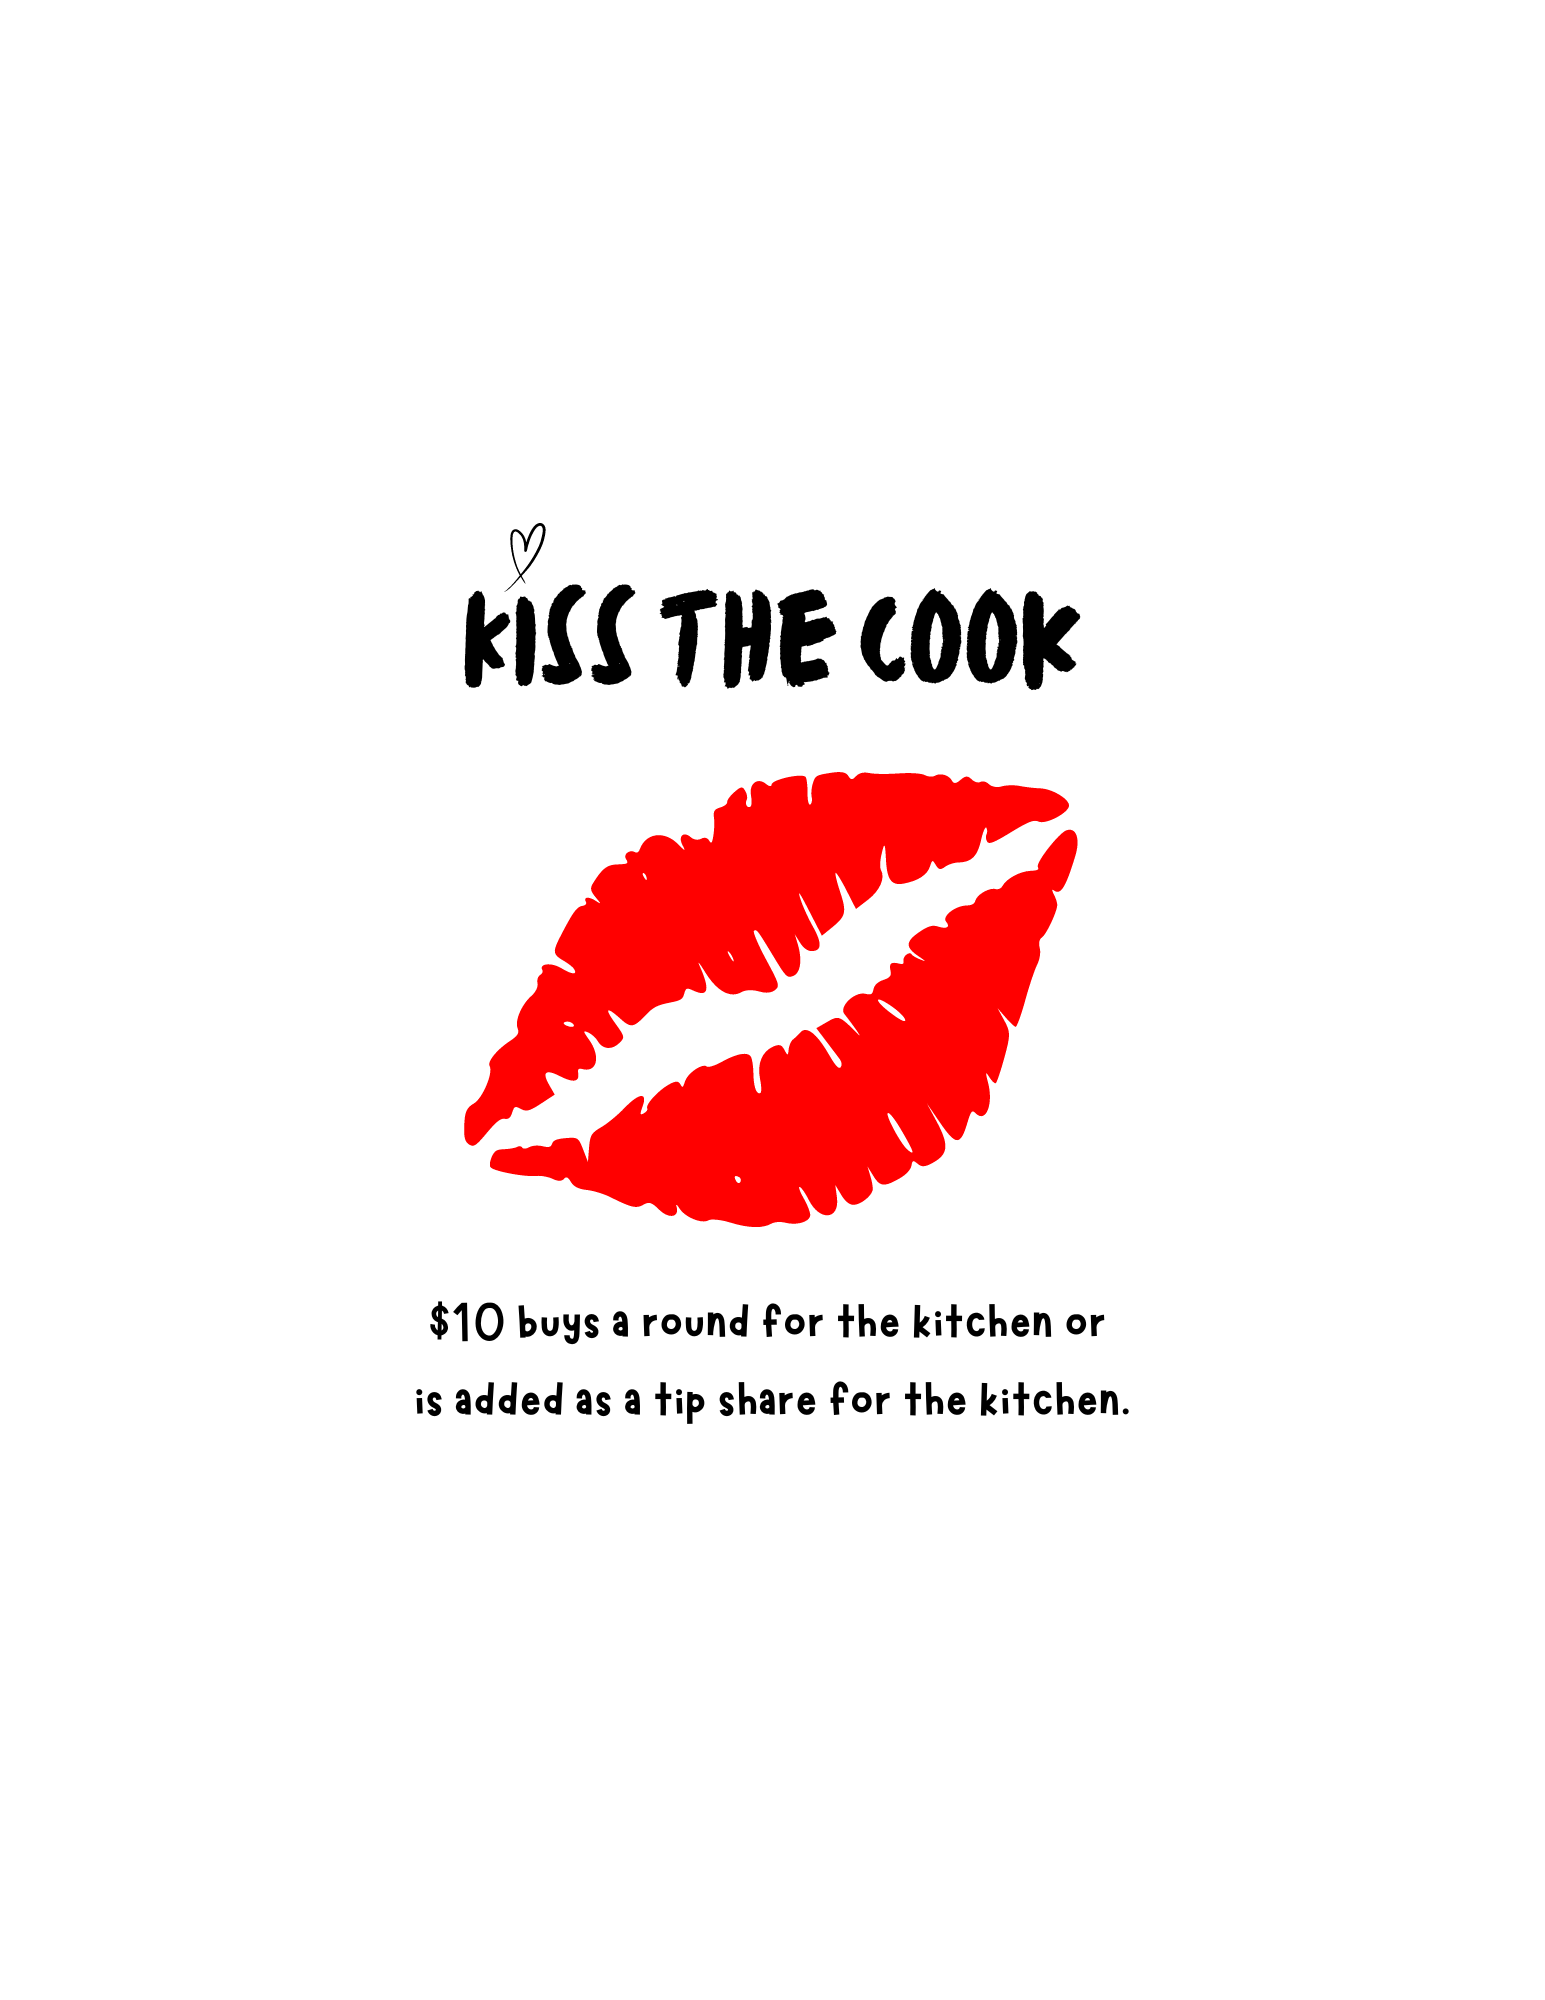 KISS THE COOK ($10 TIP FOR THE COOKS)